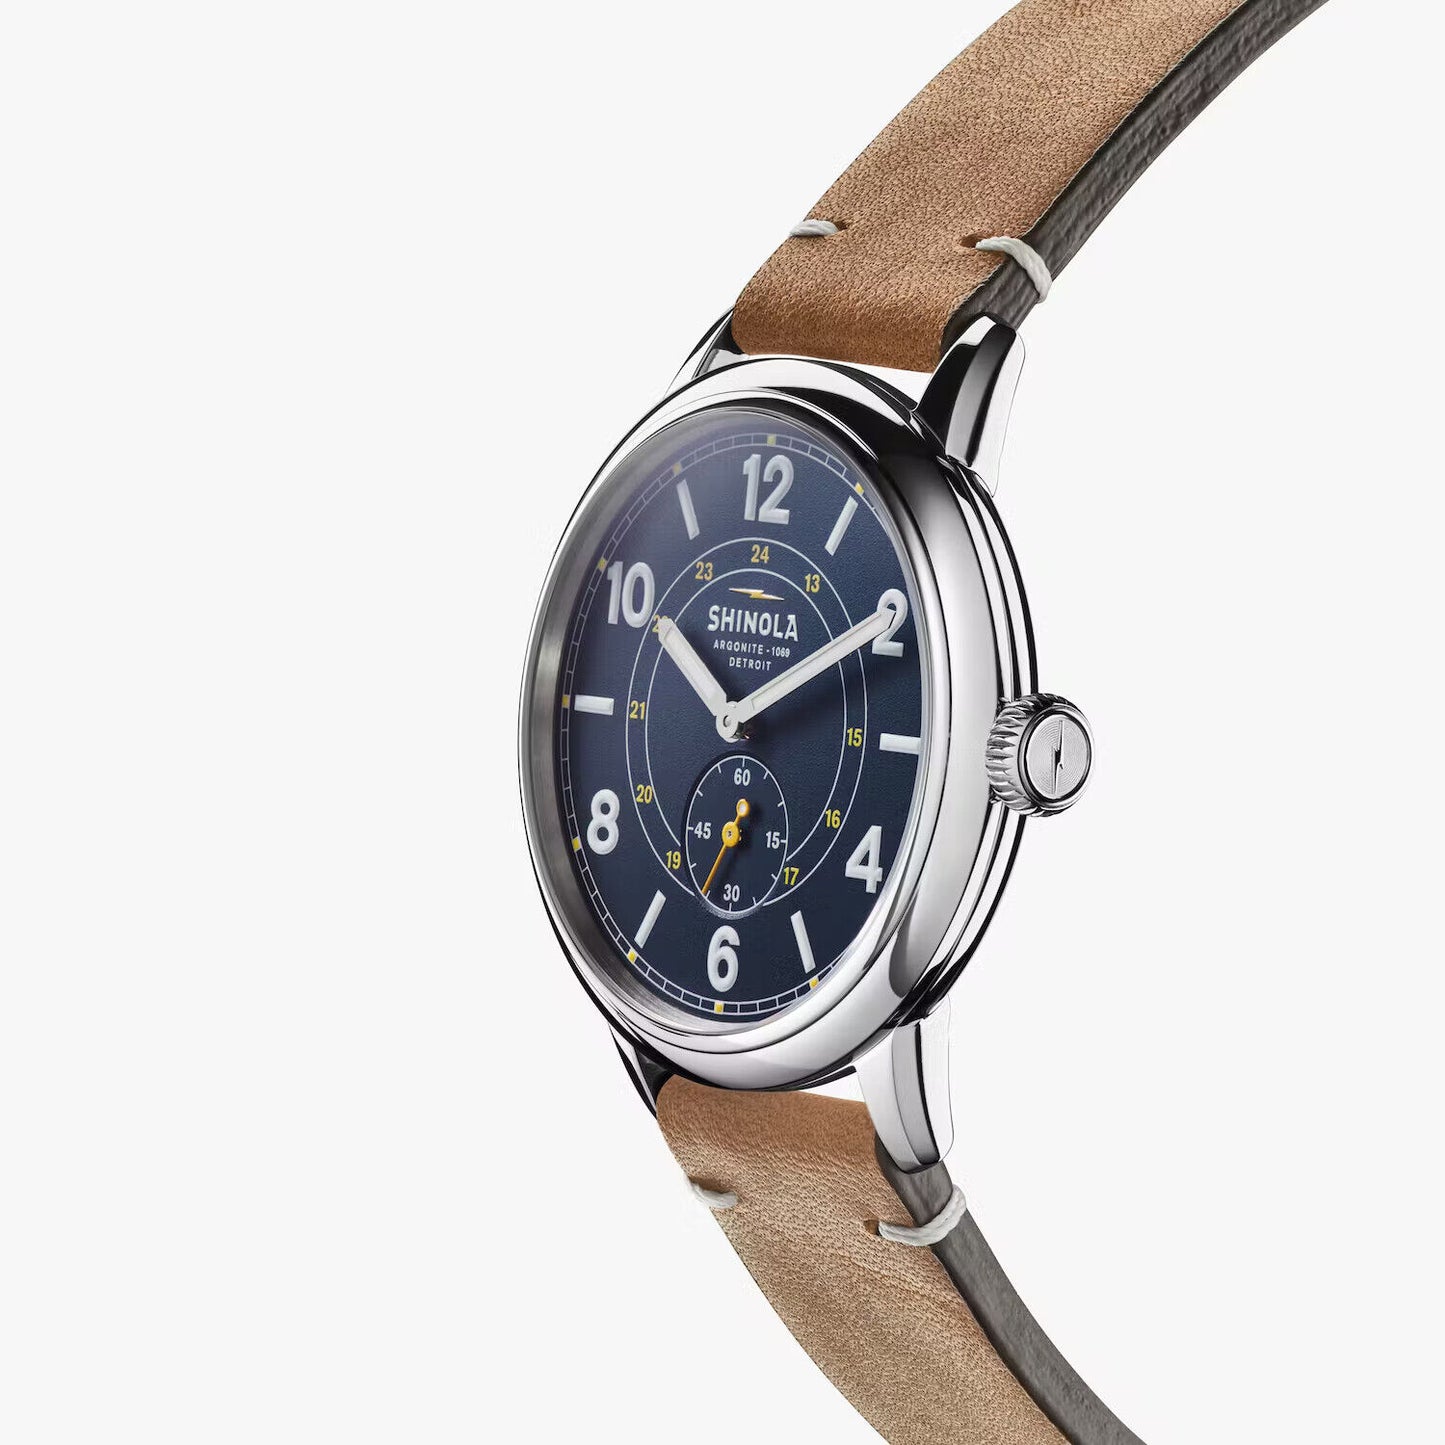 The Traveler Subsecond Blue Dial